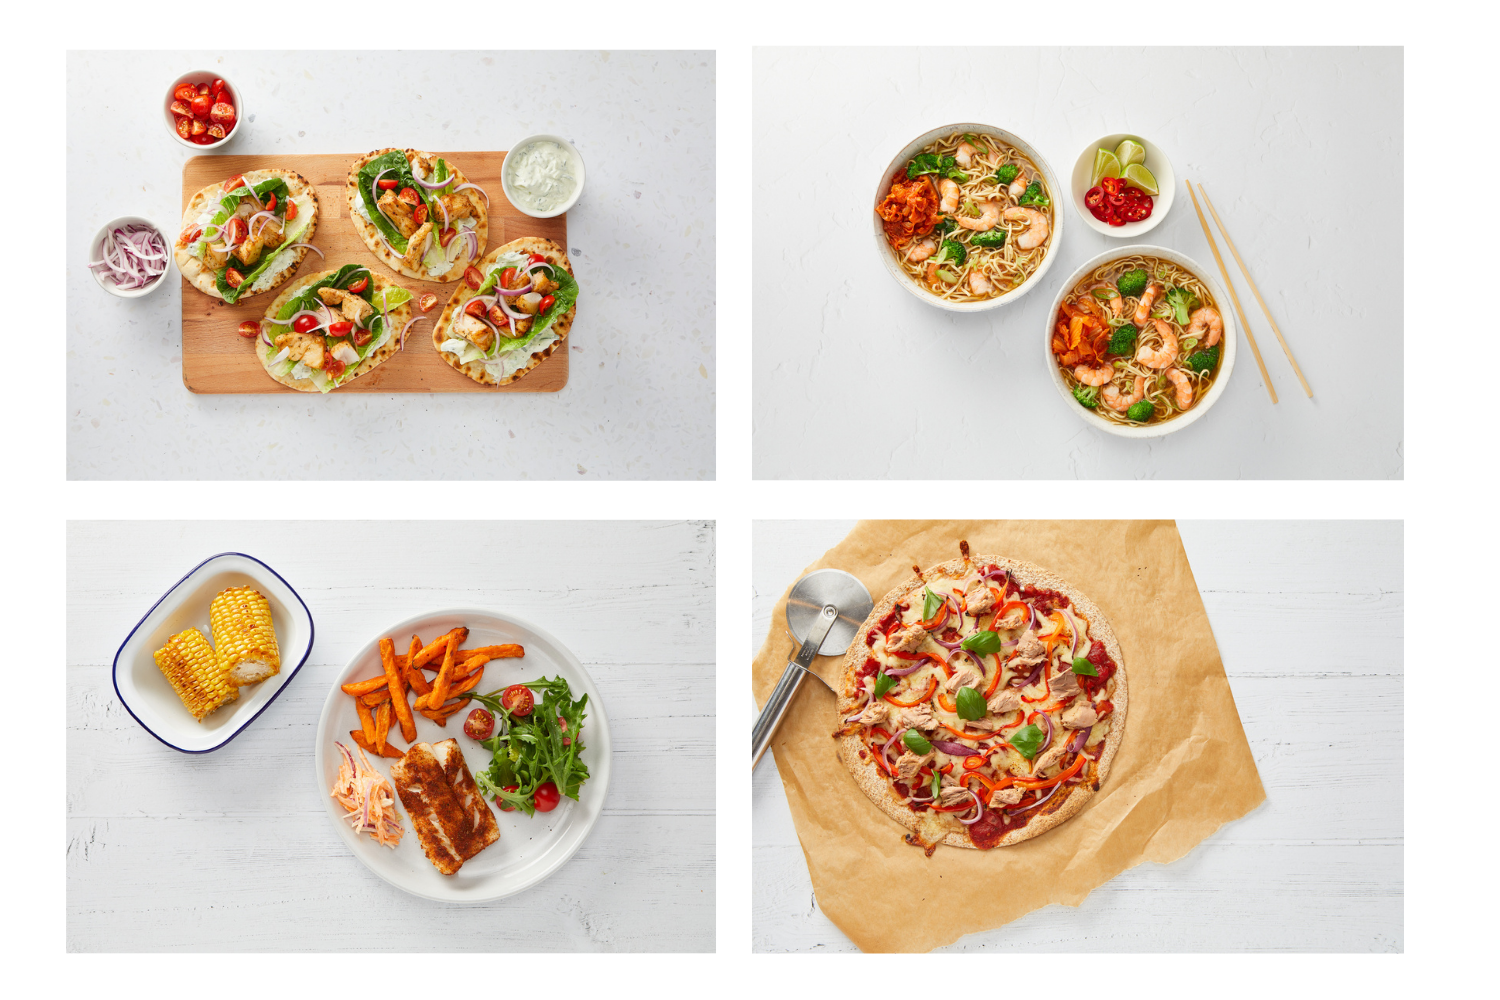 Photos of four different seafood dishes